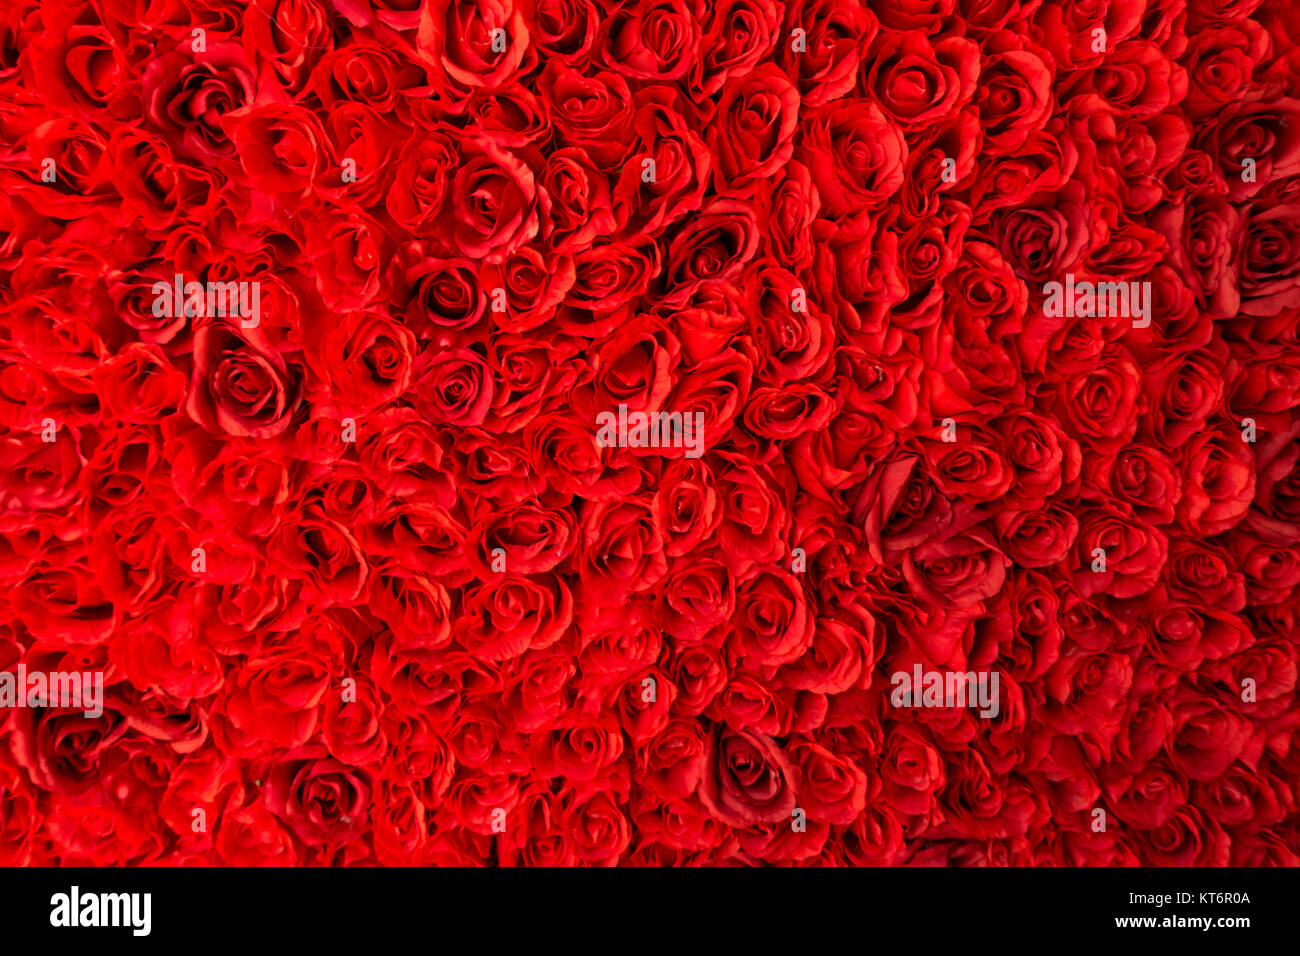 lots of red roses clustered together Stock Photo